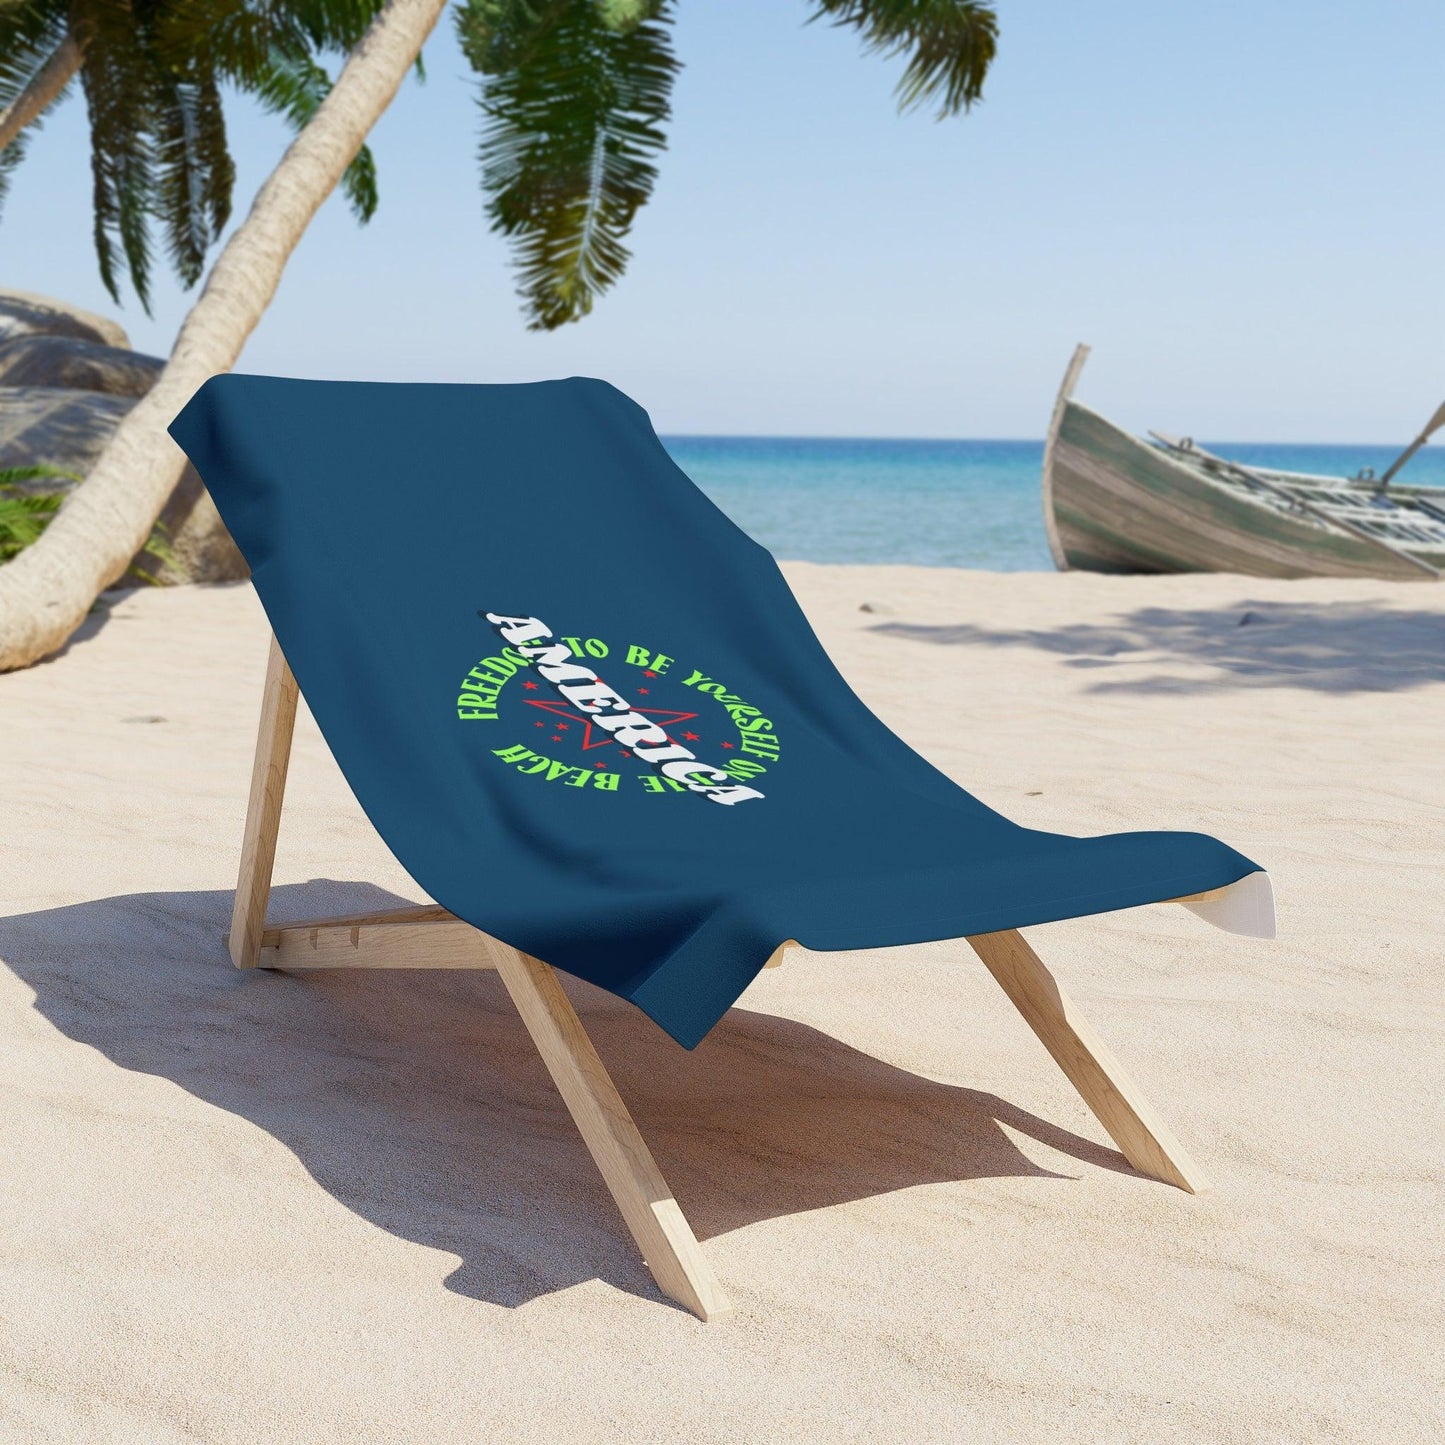 Freedom to be yourself at the Beach, America Beach Towel Wrap - Coastal Collections